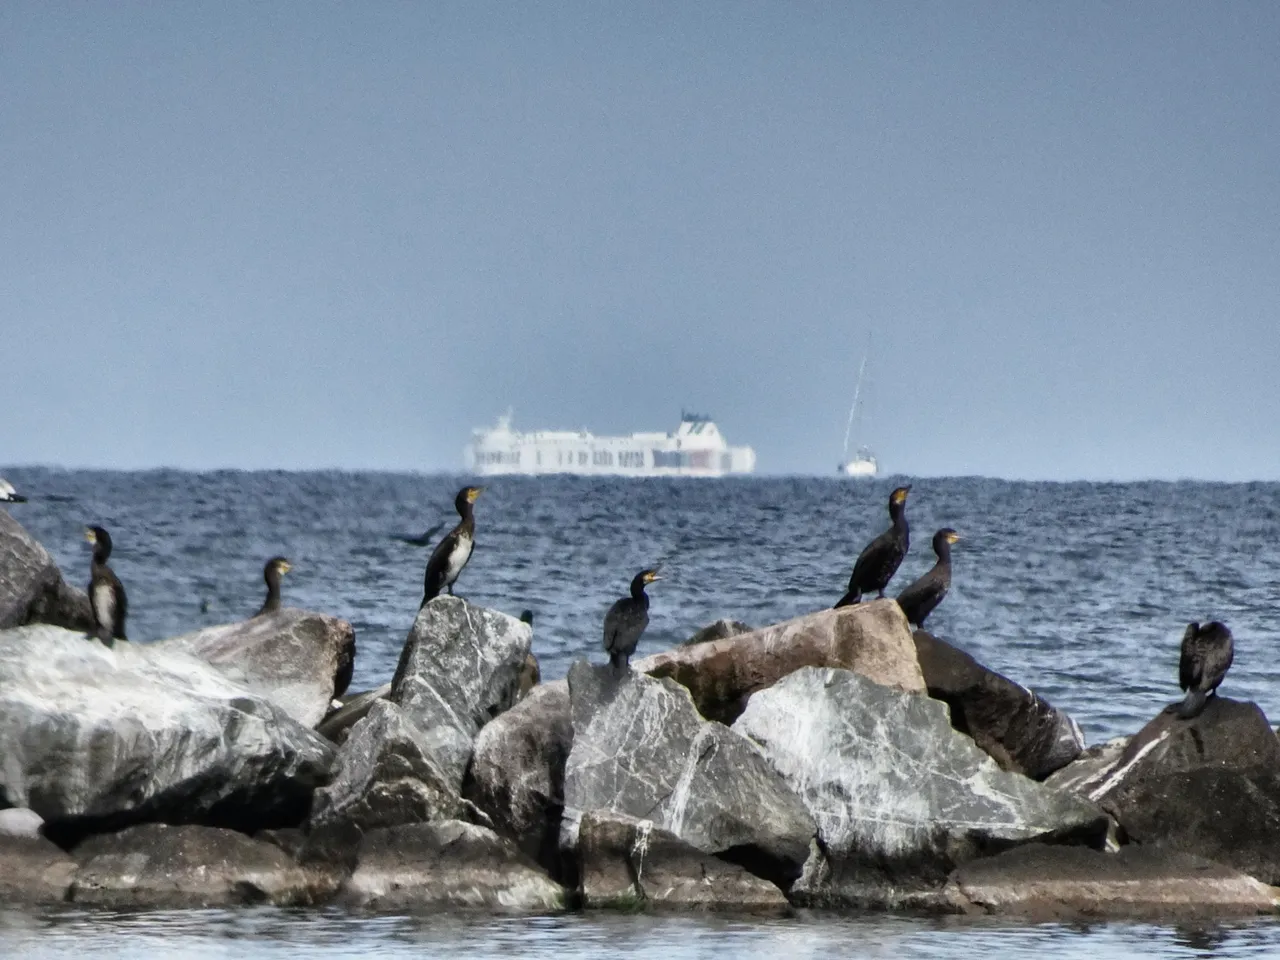 Birds and a ferry on the Baltic Sea